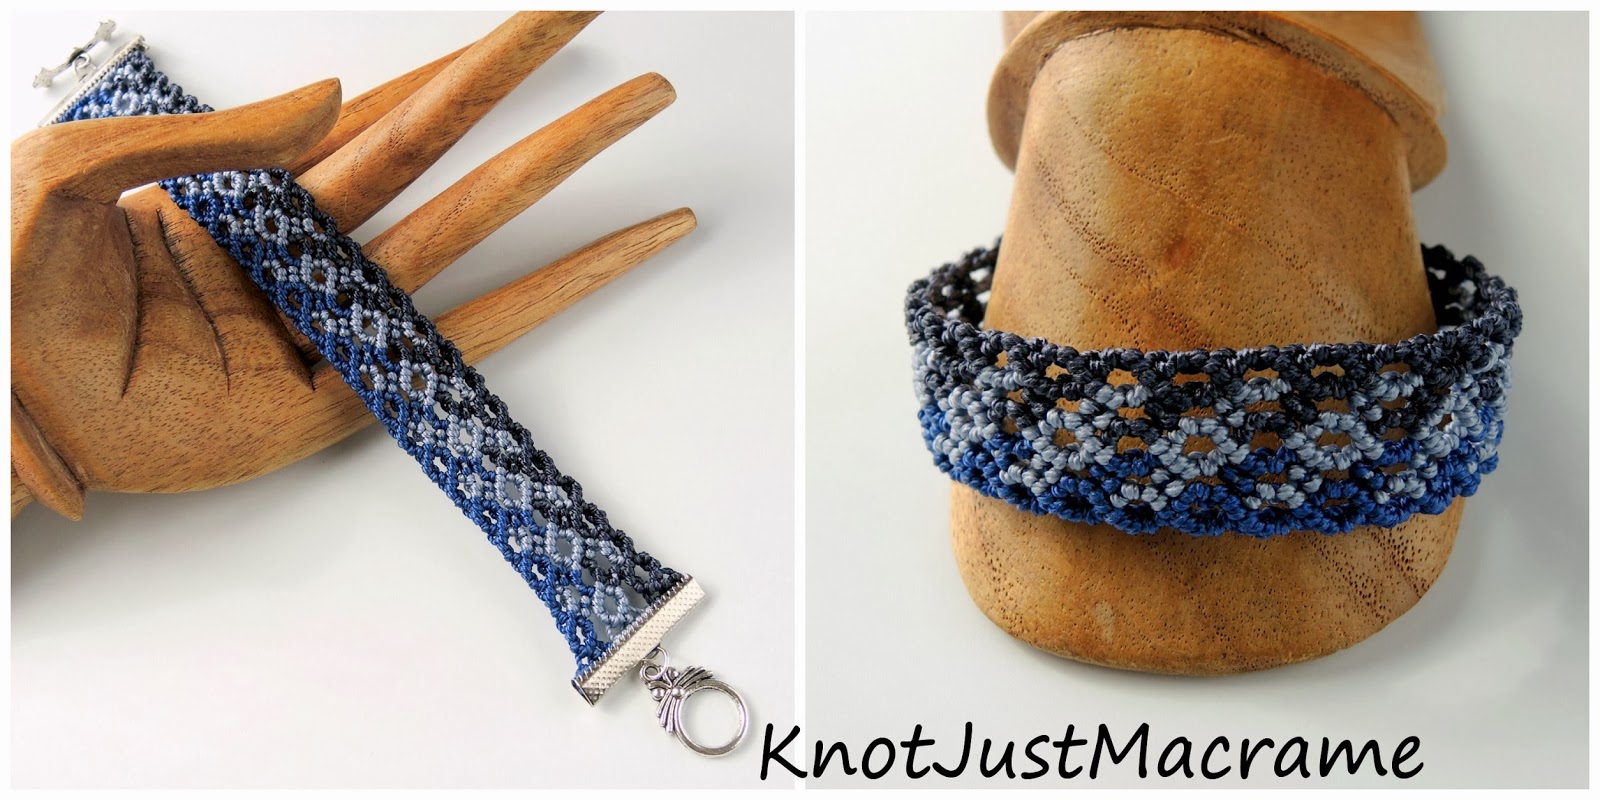 Tutorial available at www.knotjustmacrame.etsy.com